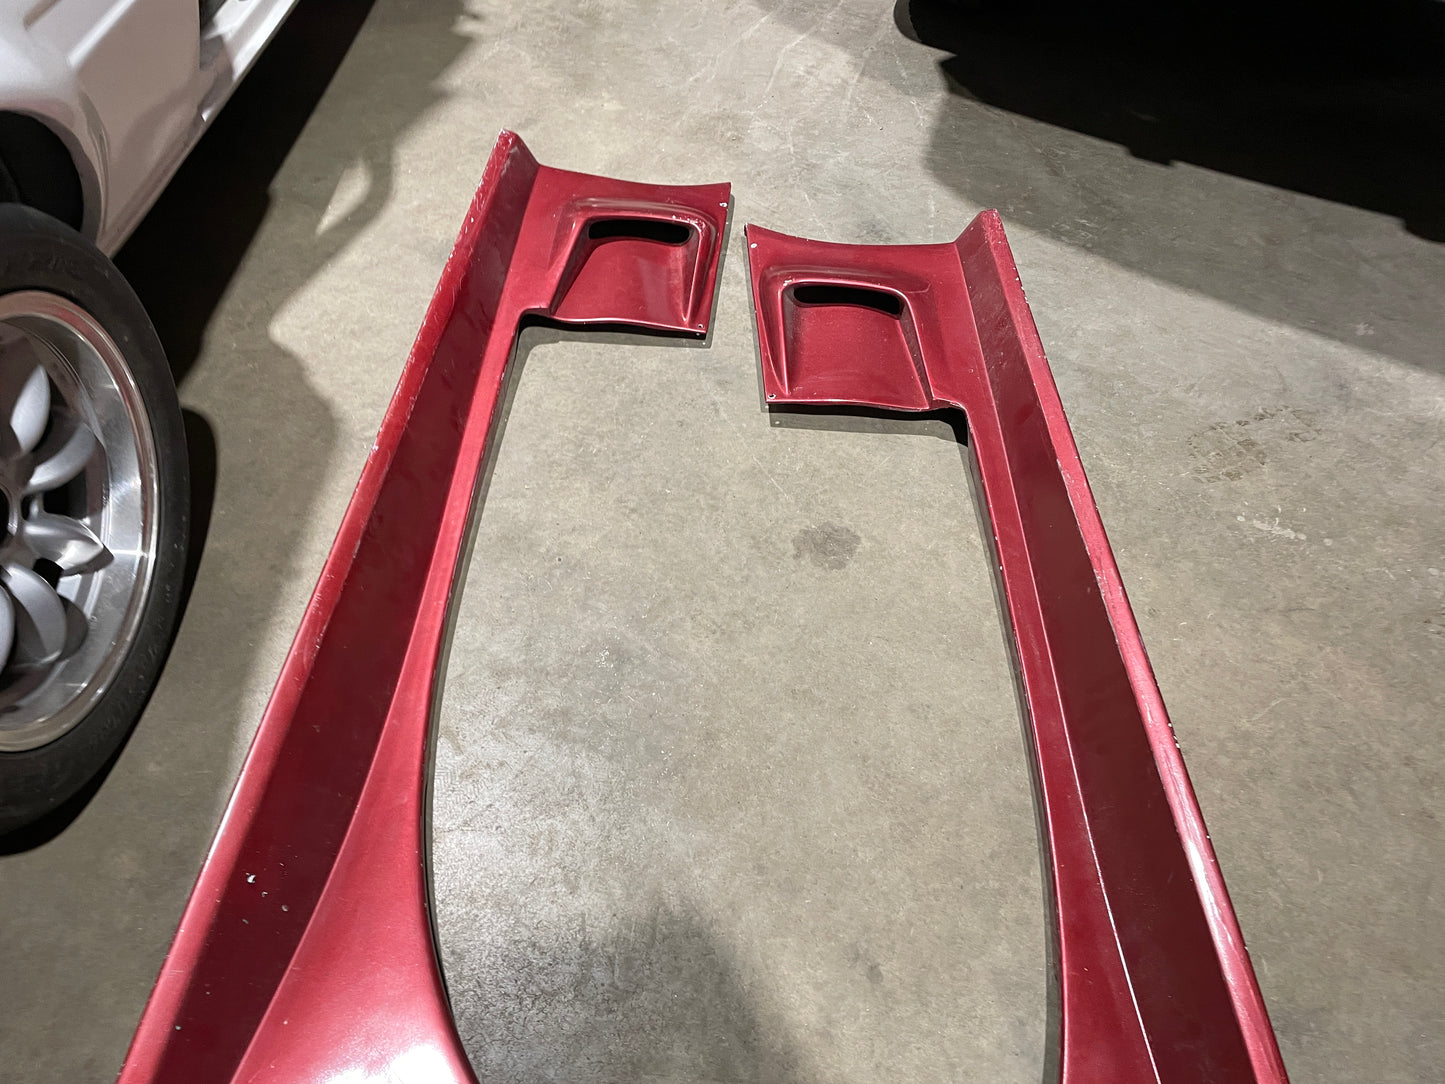 Mazda RX-7 FD3S Side Skirts (Cannot Confirm "Veilside")